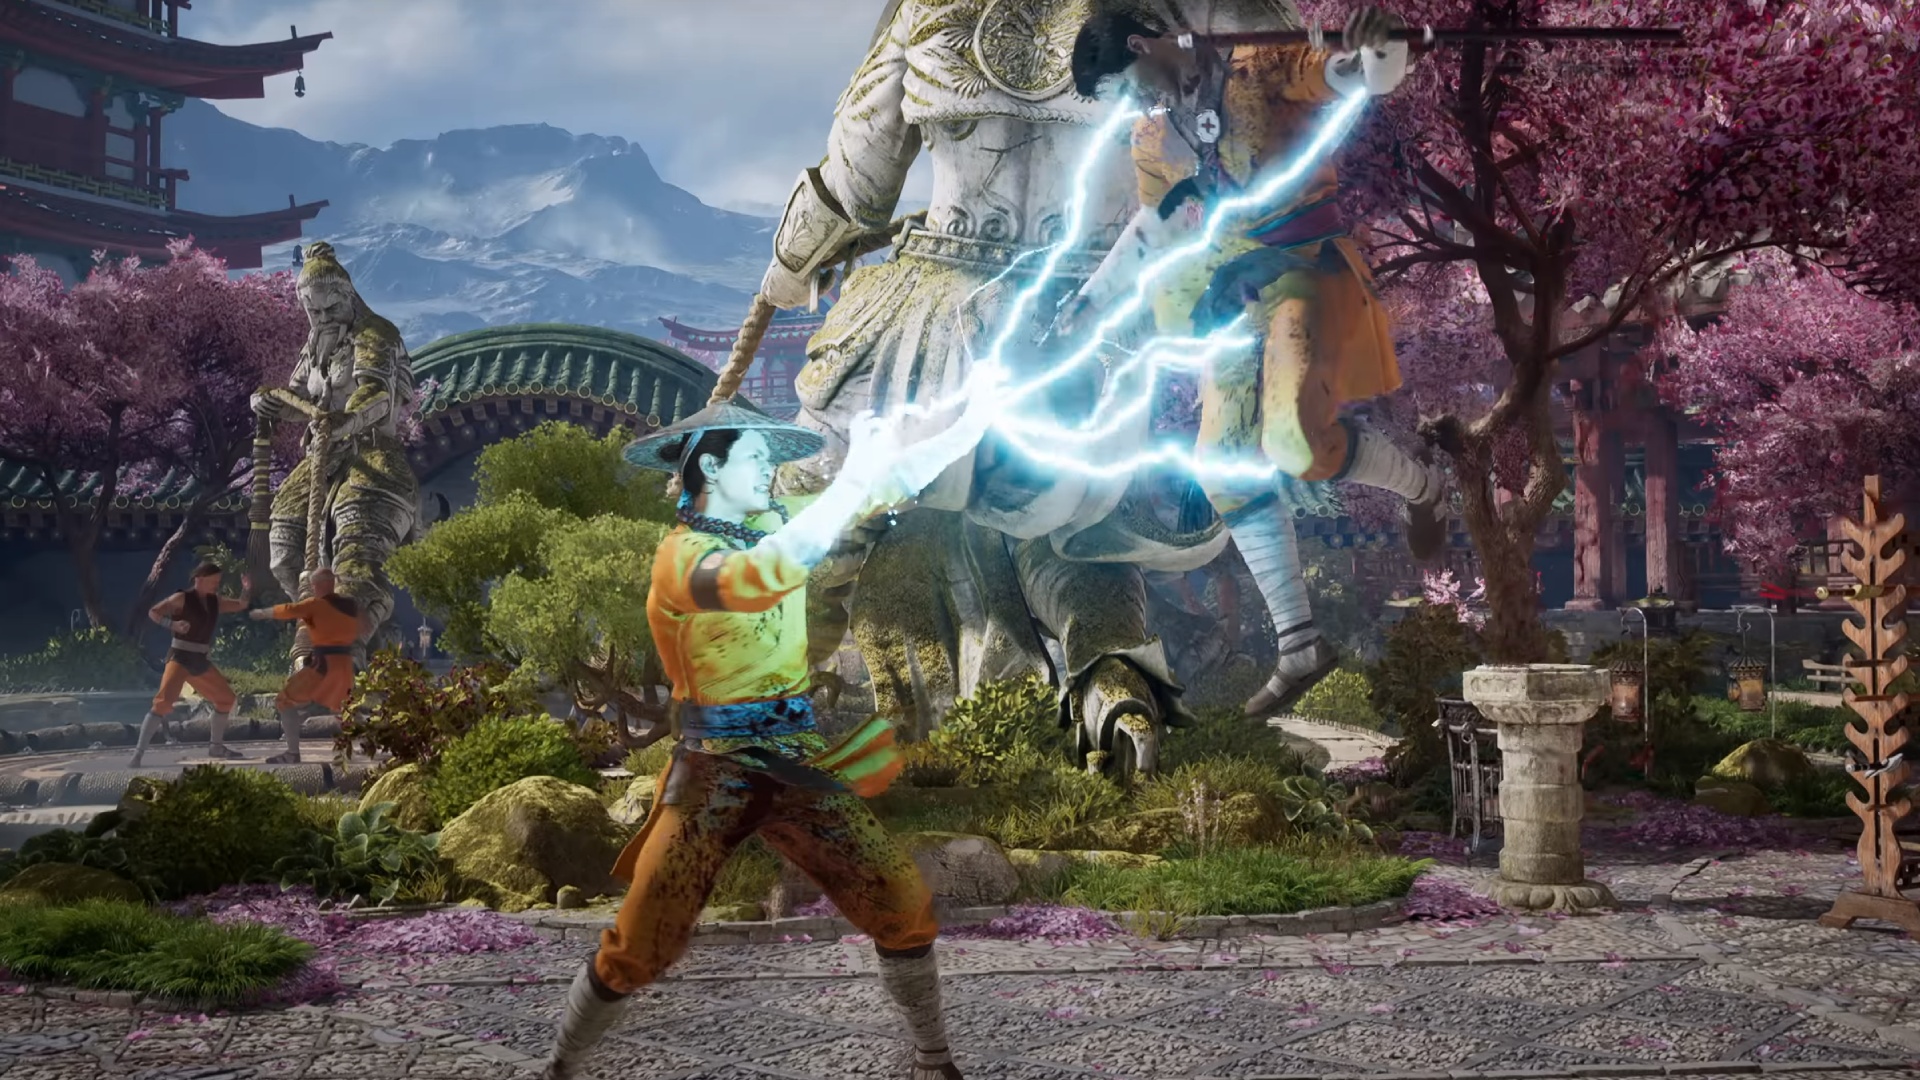 Mortal Kombat 1 characters: Raiden electrocuting an enemy, holding them in the air.